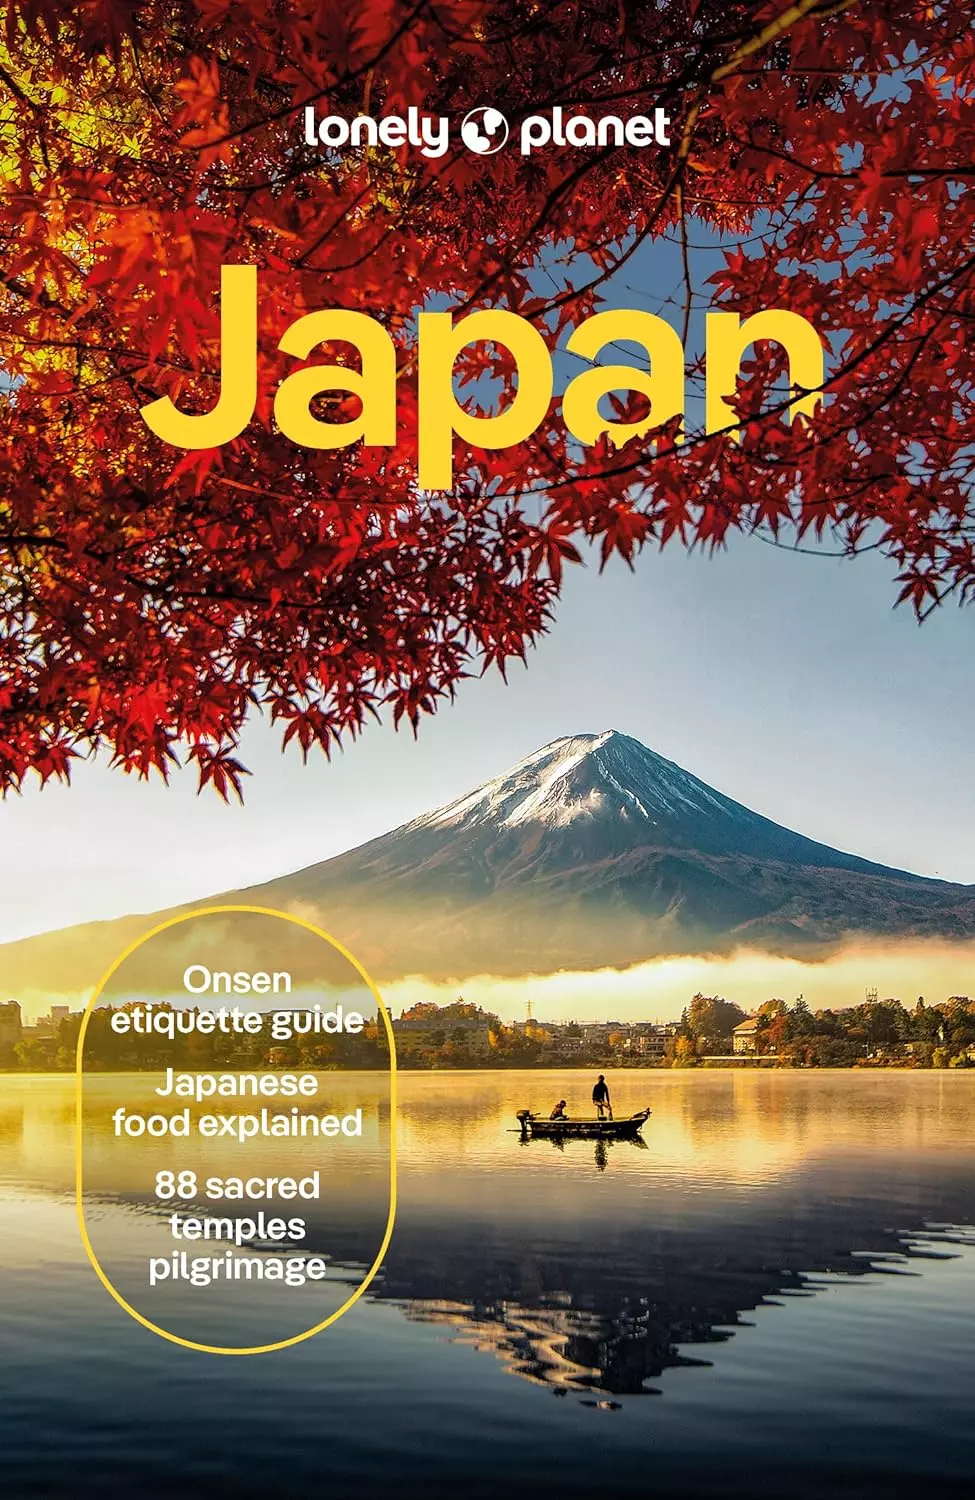 Japonia ghid turistic Lonely Planet (engleză)